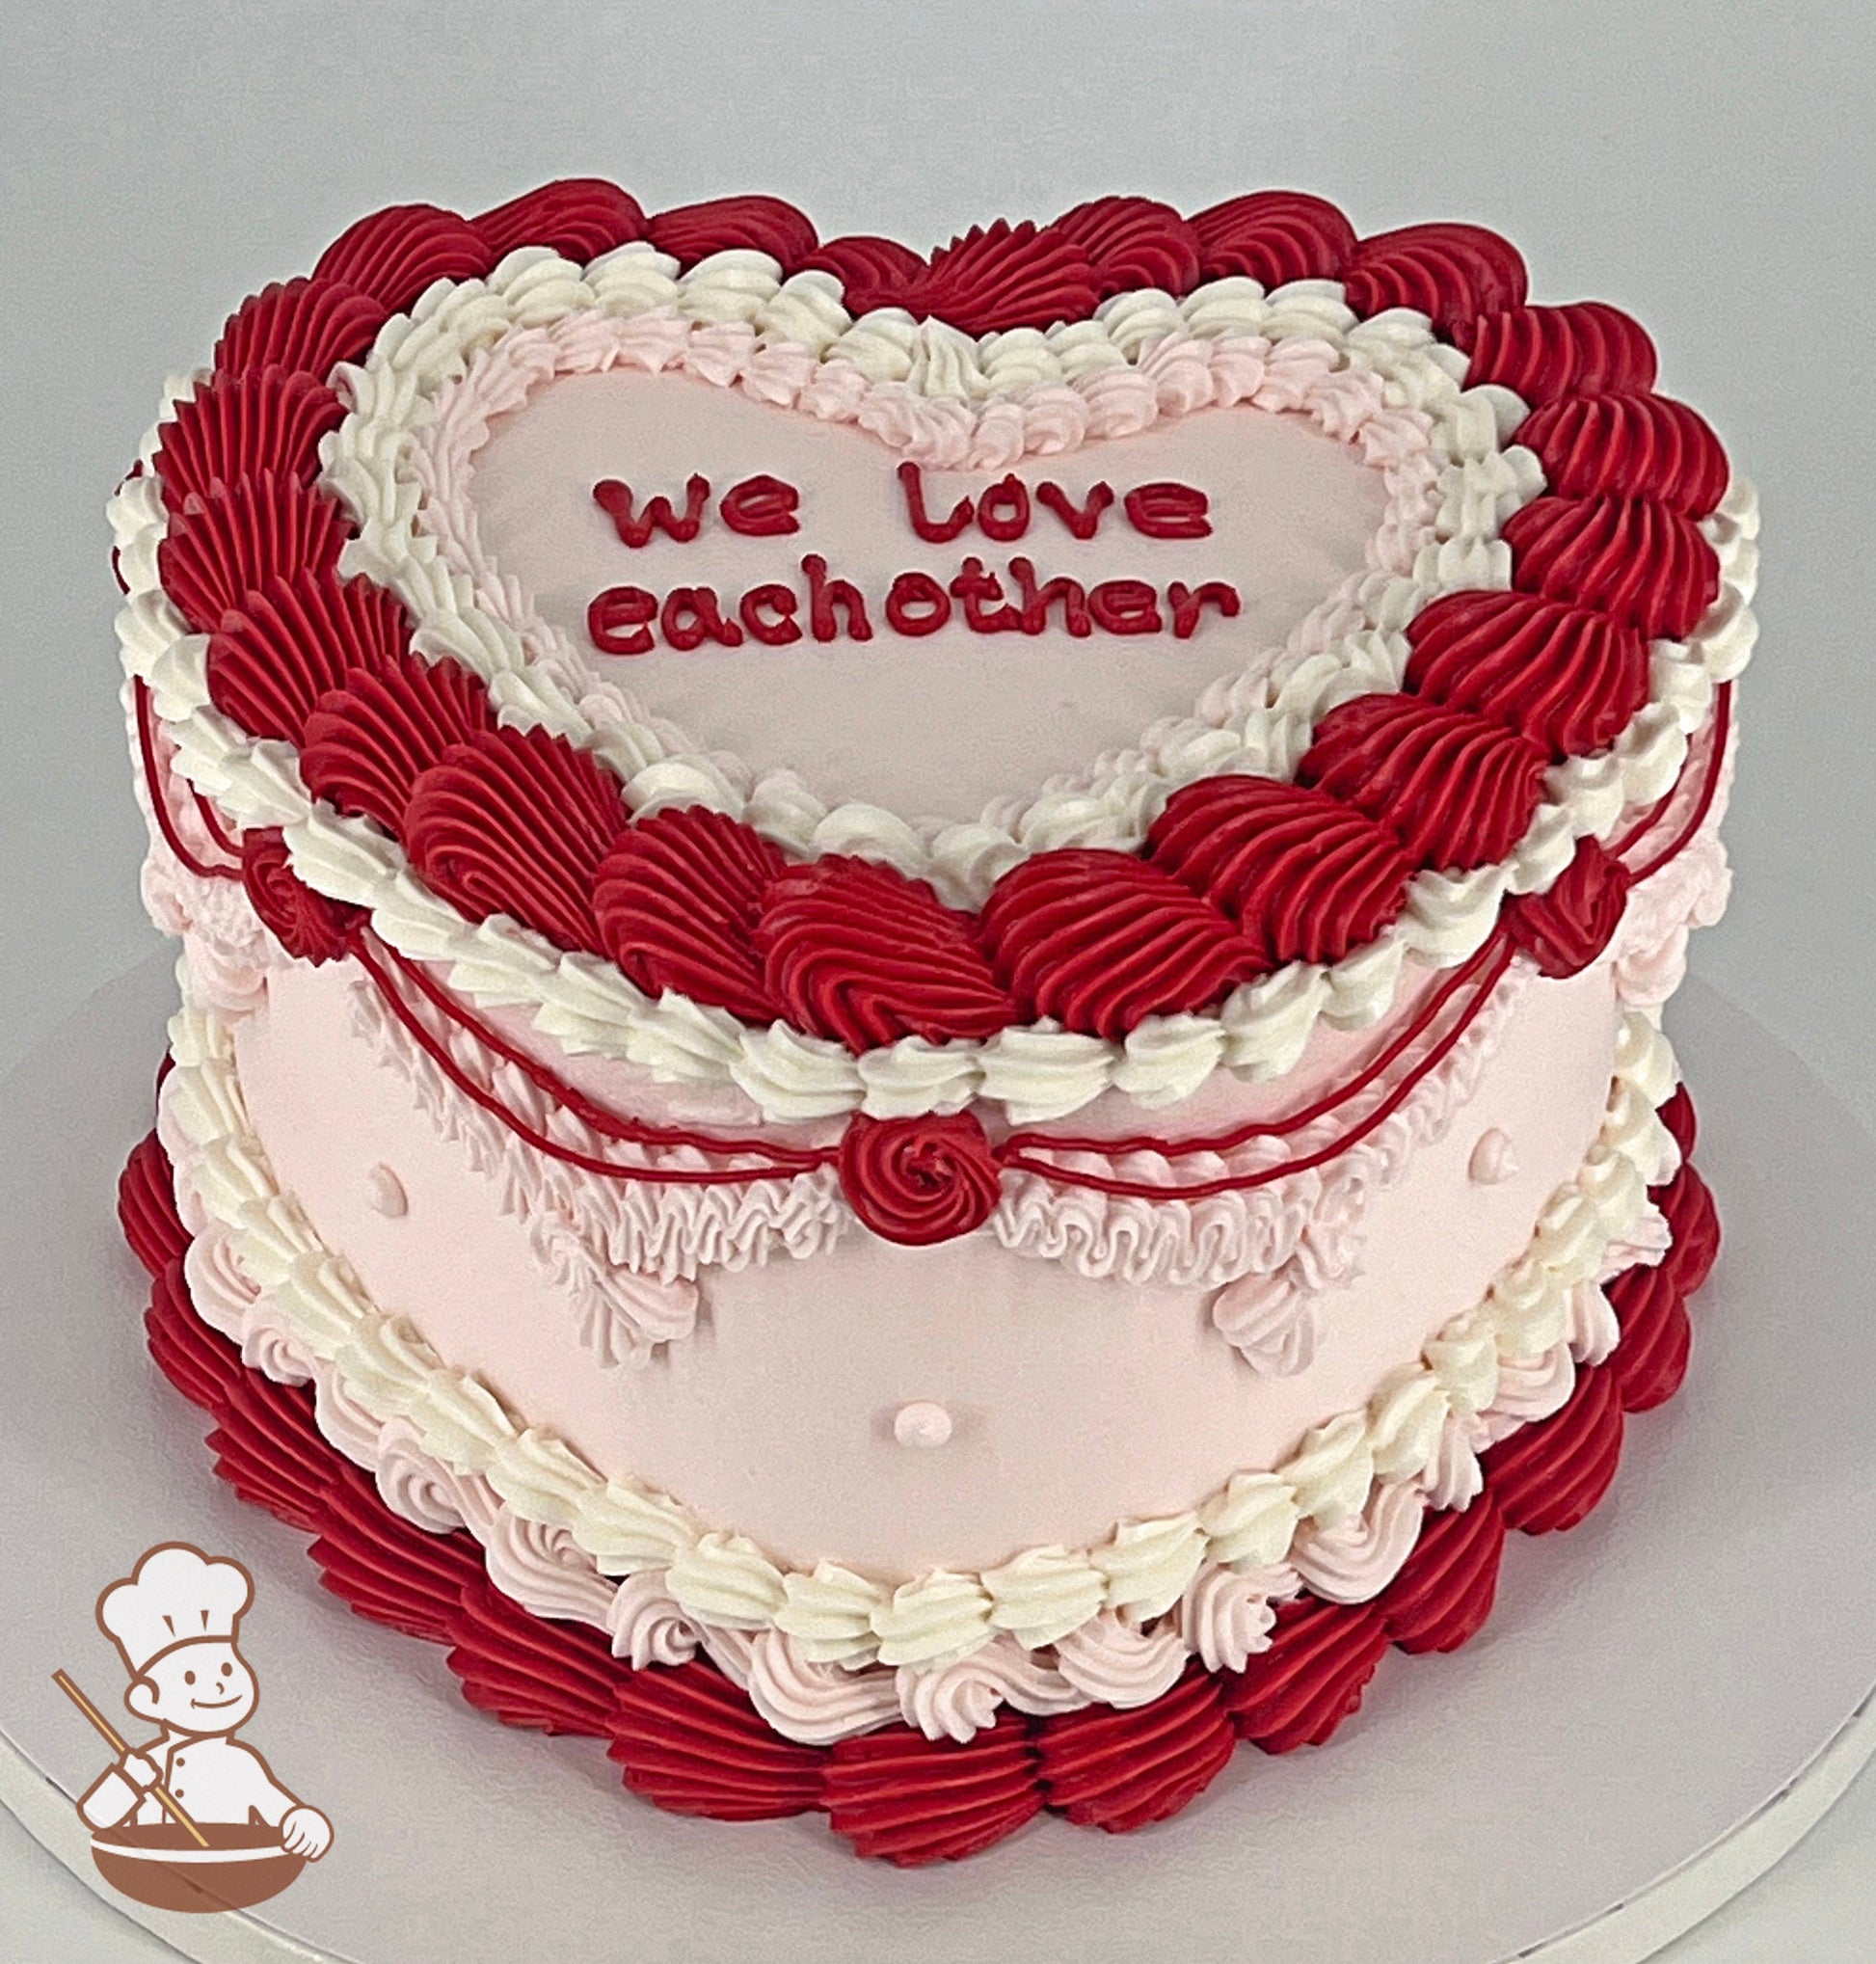 Heart Shaped cake with light-pink smooth icing, decorated with vintage style buttercream piping's in white, red and light-pink colors.